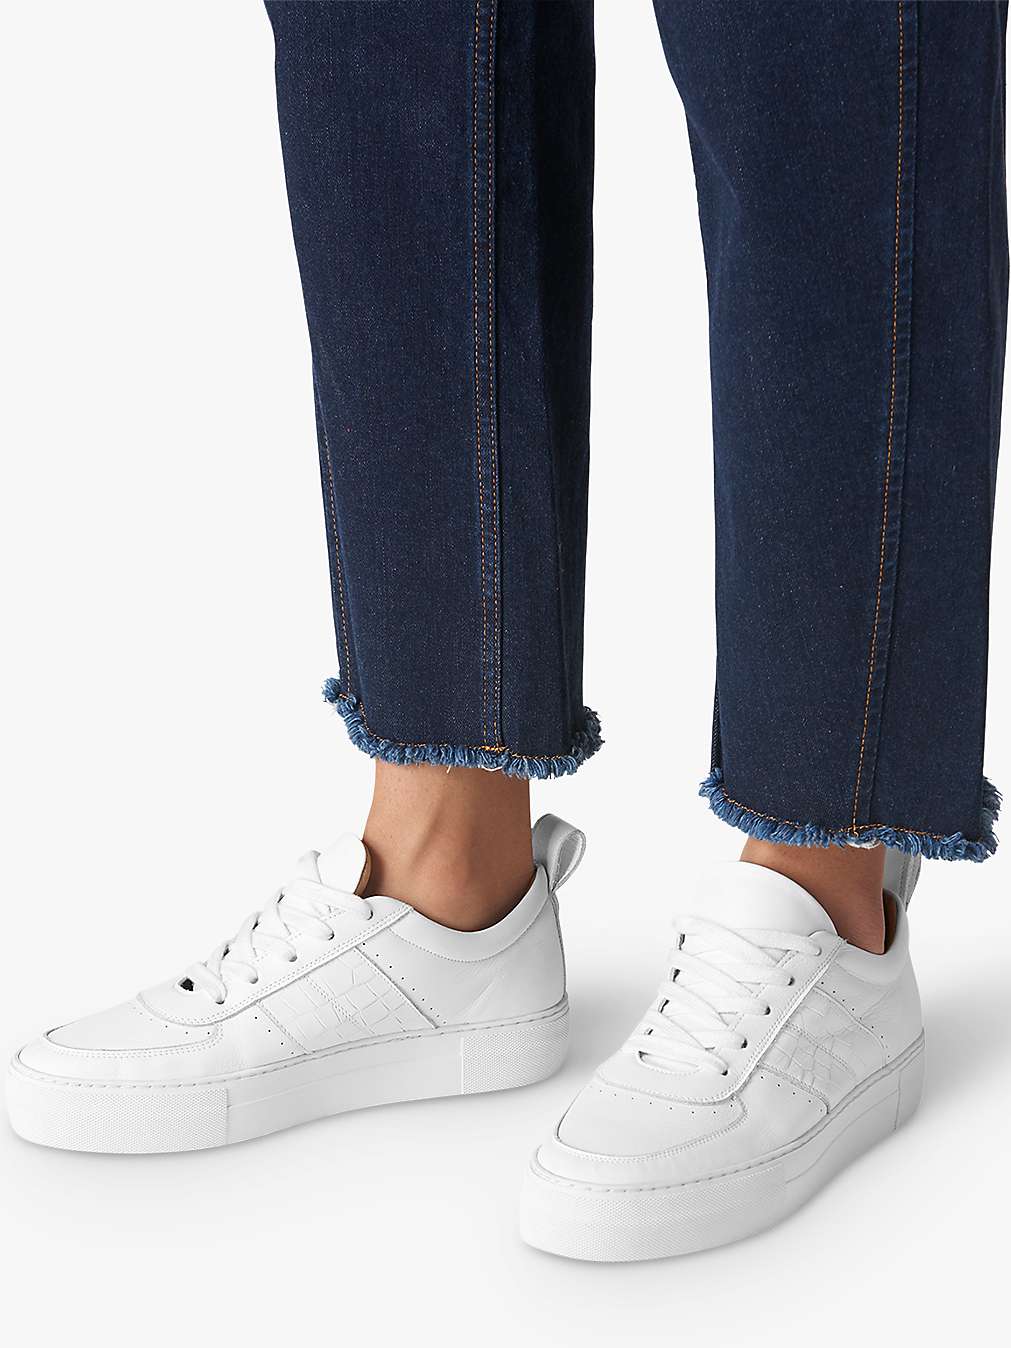 Whistles Anna Deep Sole Trainers, White Leather at John Lewis & Partners